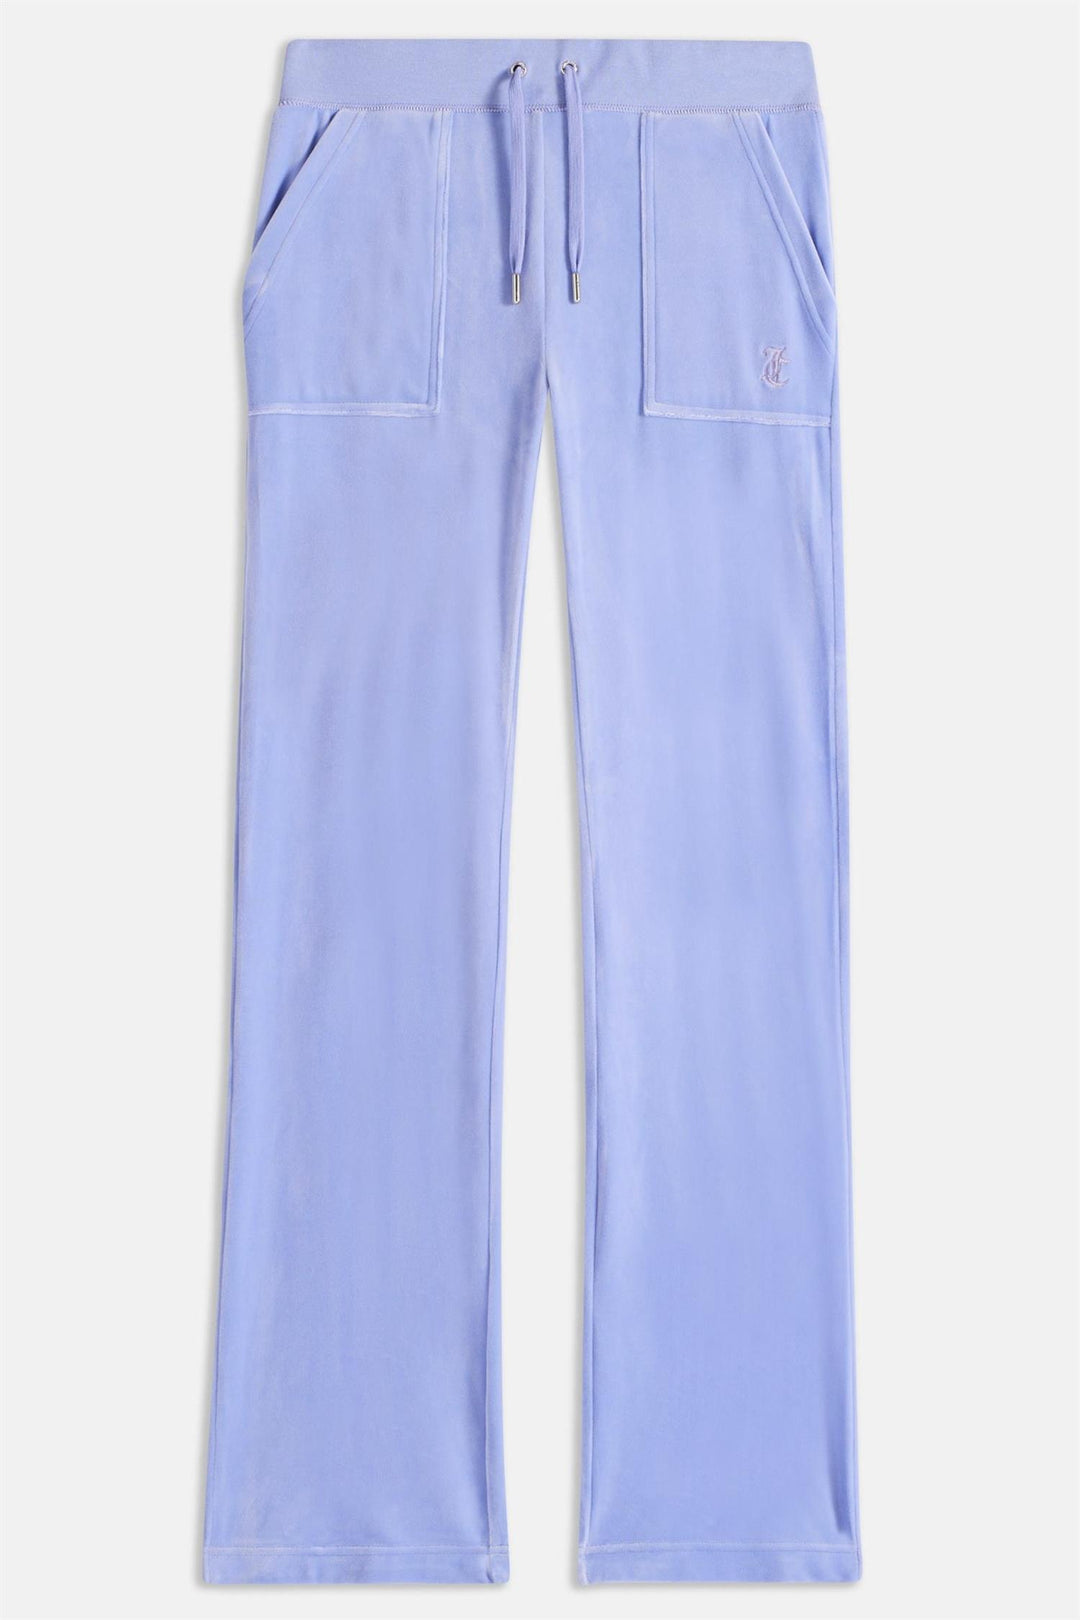 JUICY COUTURE - Del Ray Pocket Pant Easter Egg - Dale